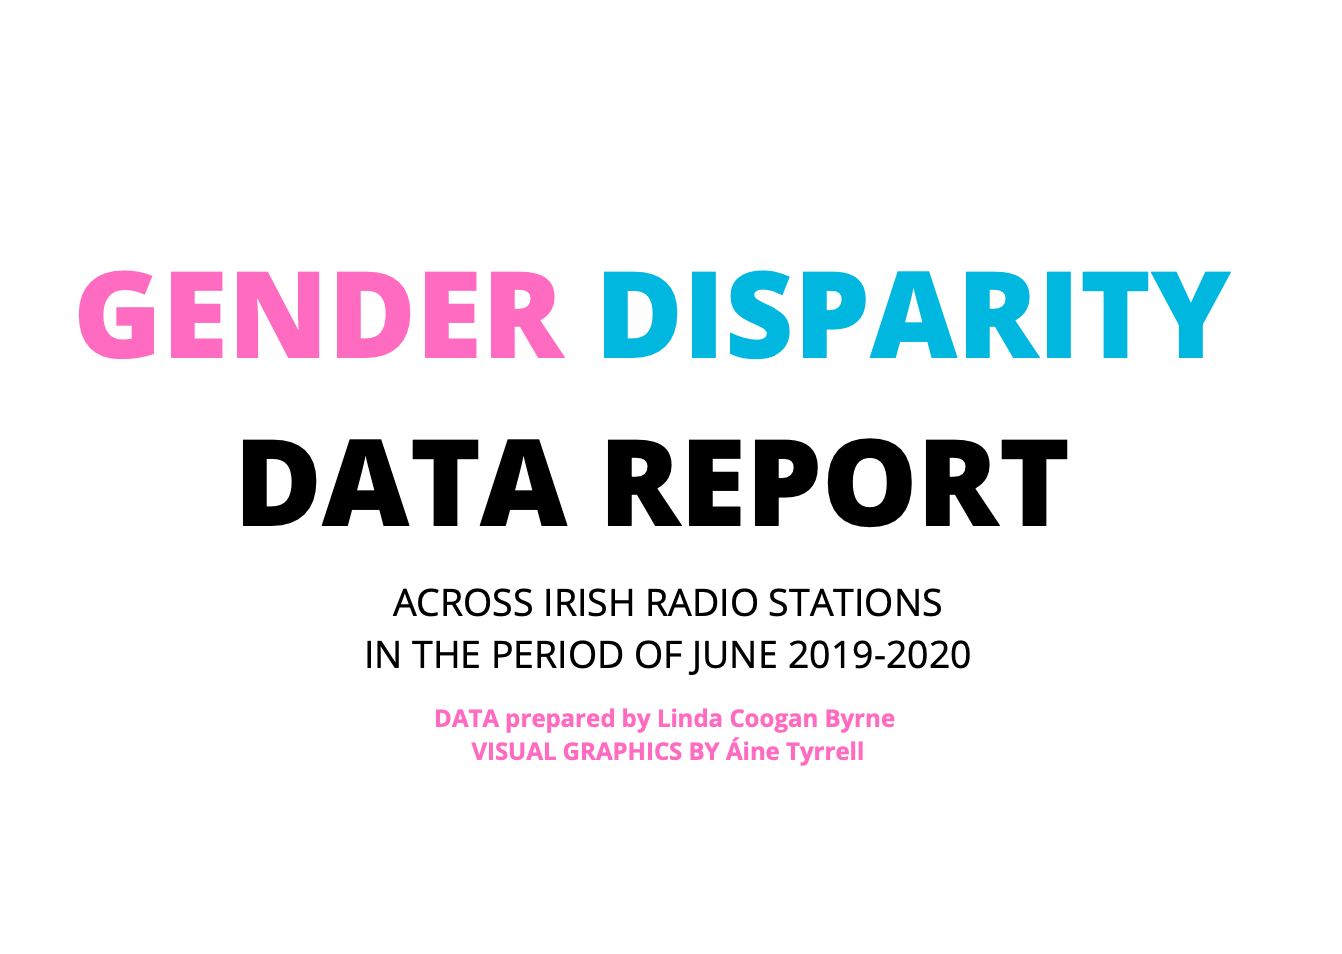 &#039;It&#039;s choosing men over women for whatever reason. I don&#039;t know why, but it has to change&#039;: Irish Female Artists Received Just 8% of Top 20 Radio Airplay